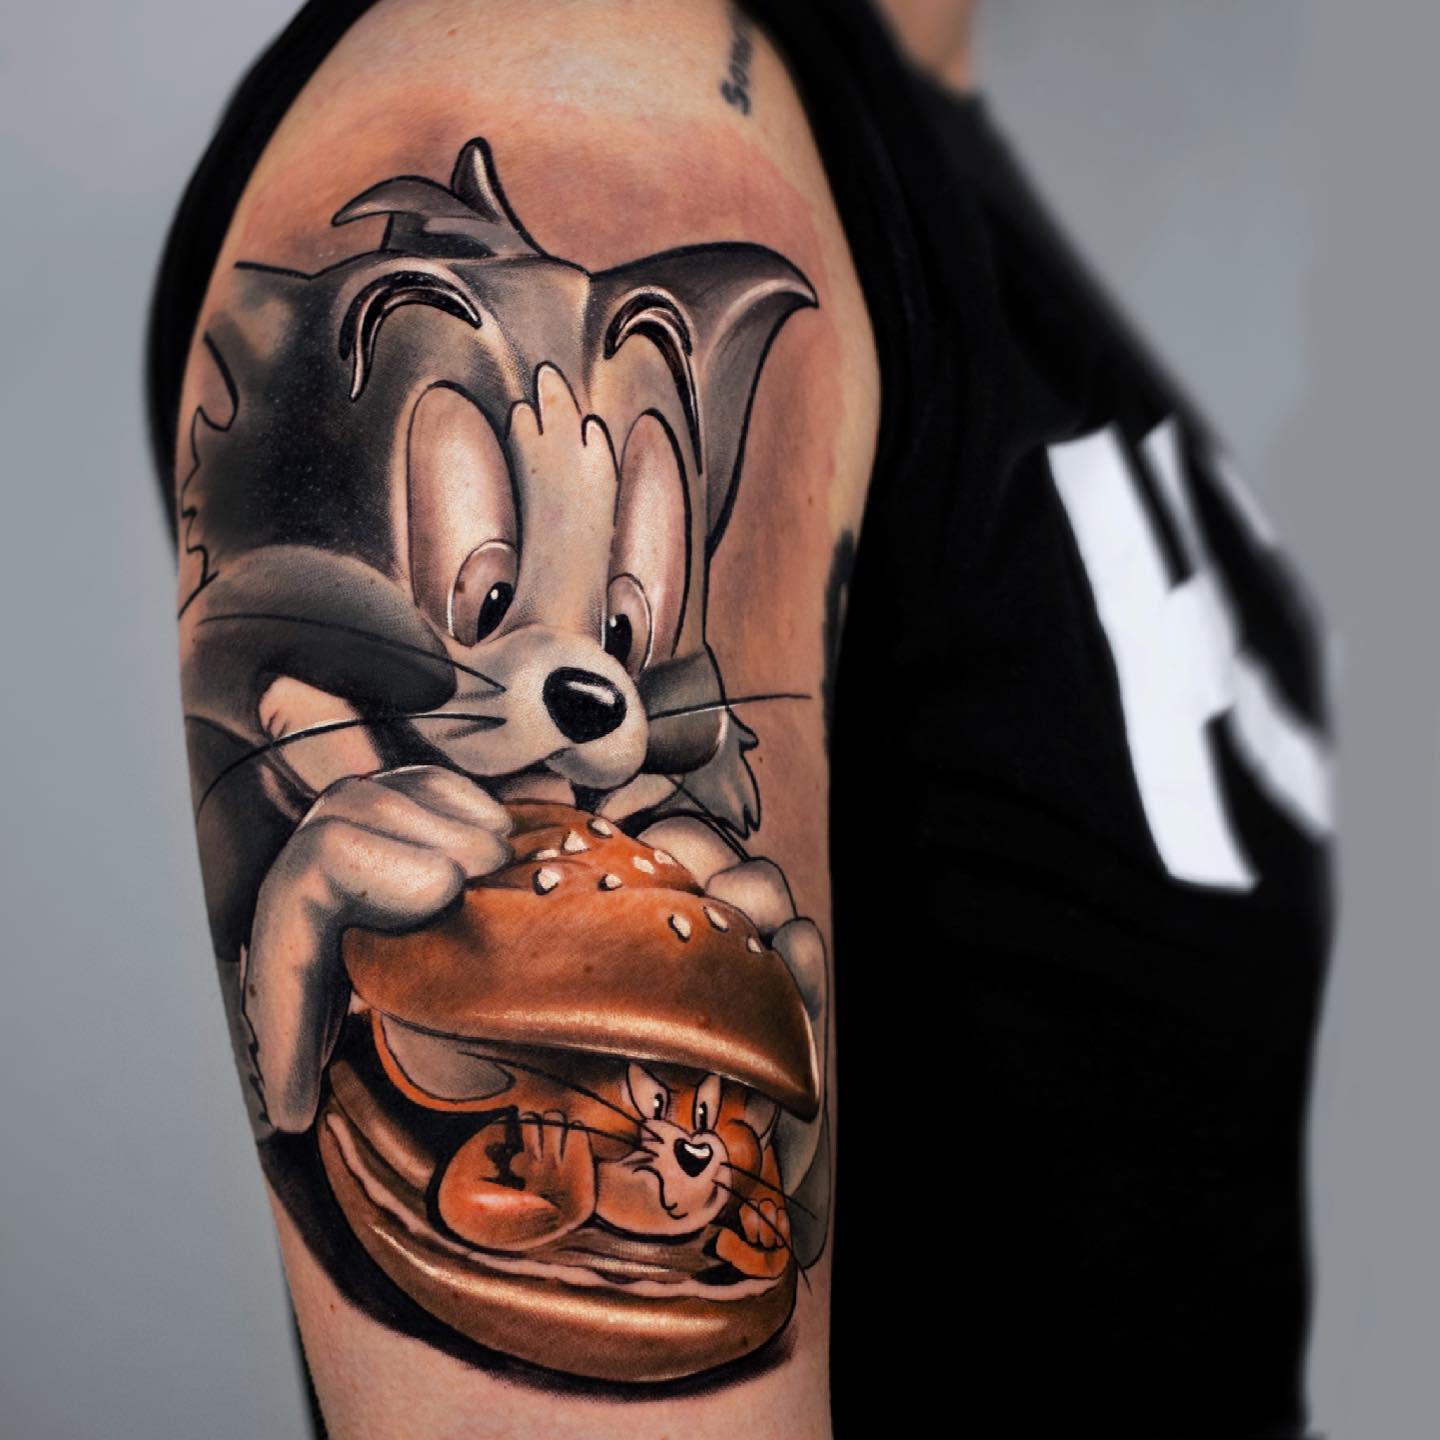 Tom and jerry tattoo by christos galiropoulos